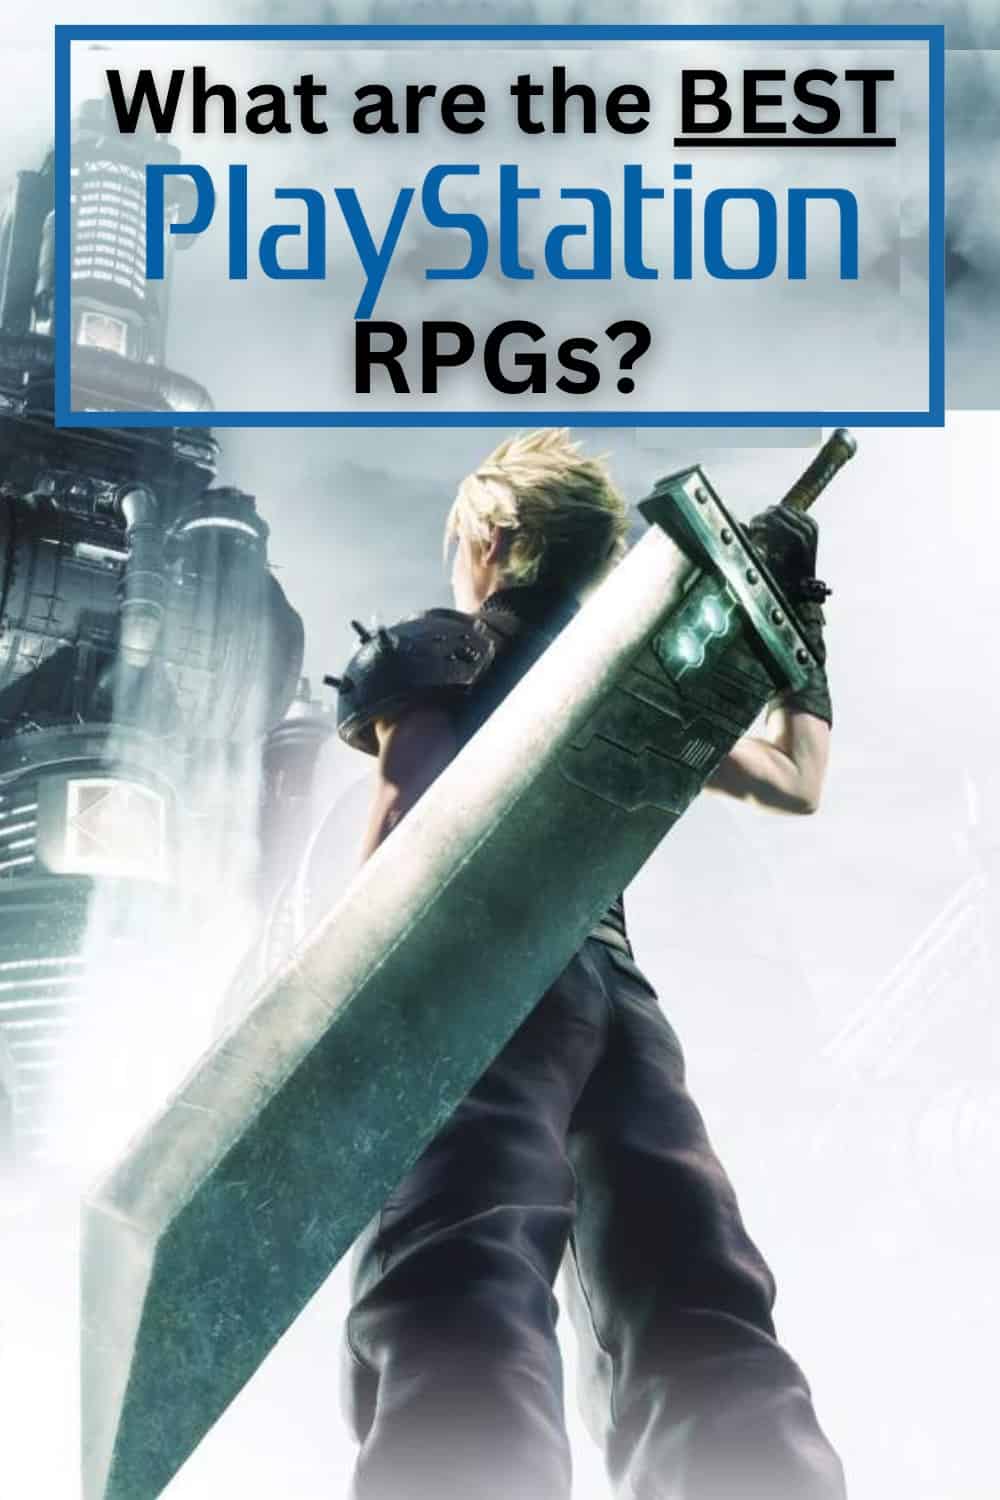 What is the best RPG for Sony PlayStation?